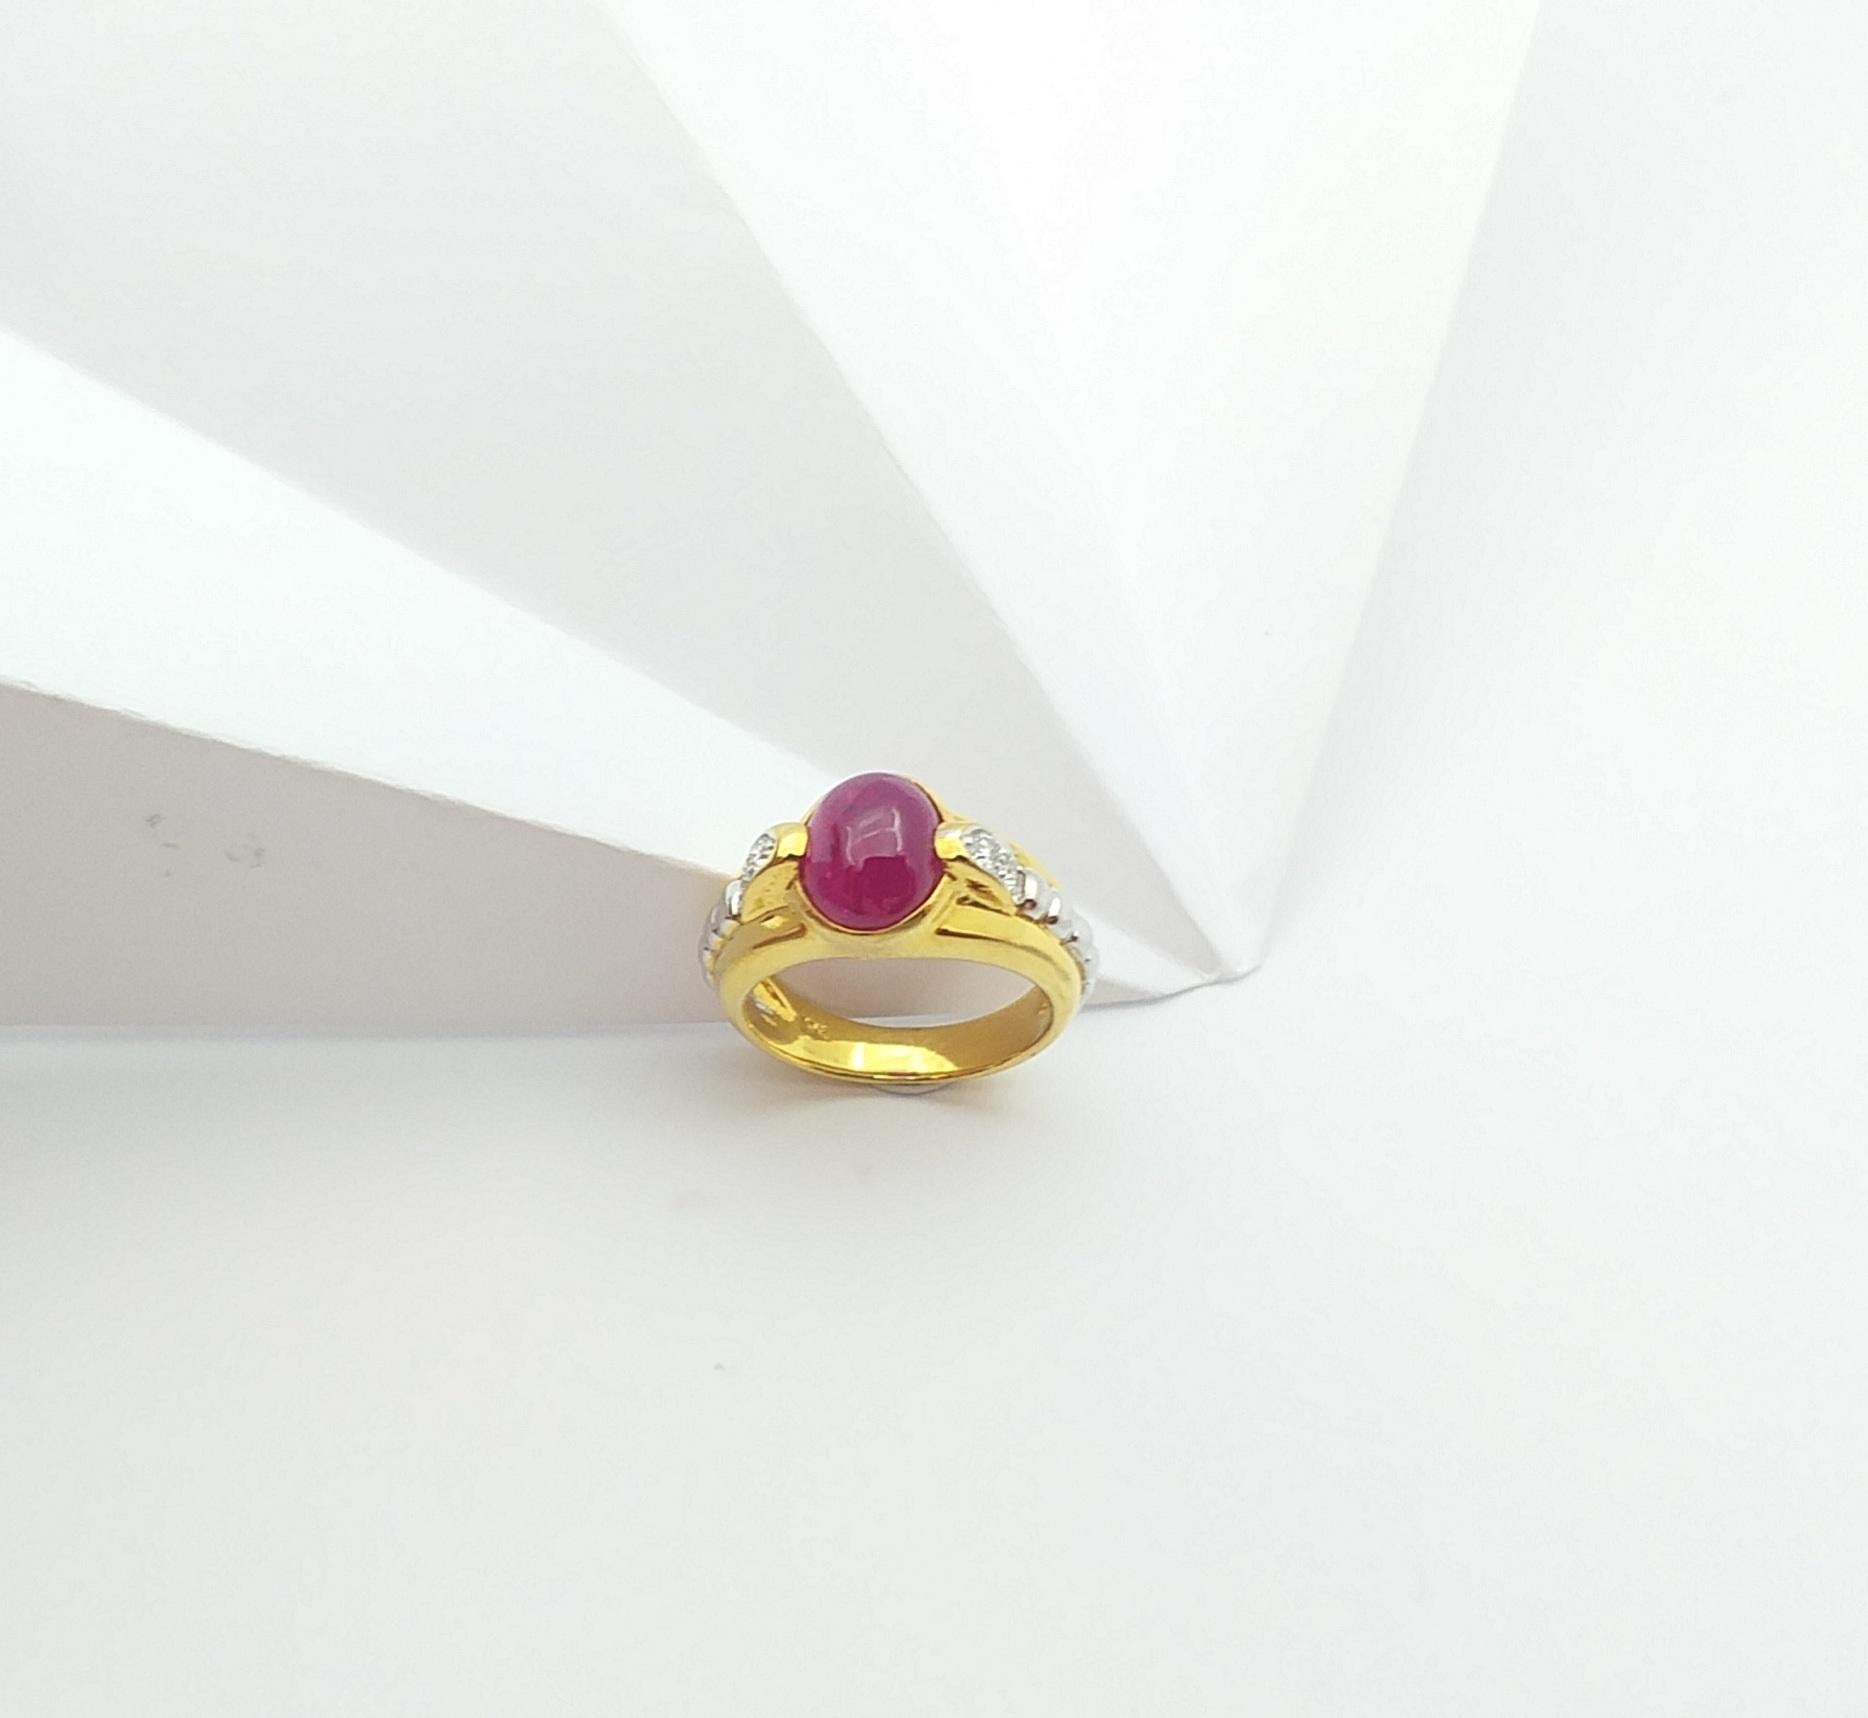 Cabochon Ruby with Diamond Ring Set in 18 Karat Gold Settings For Sale 7